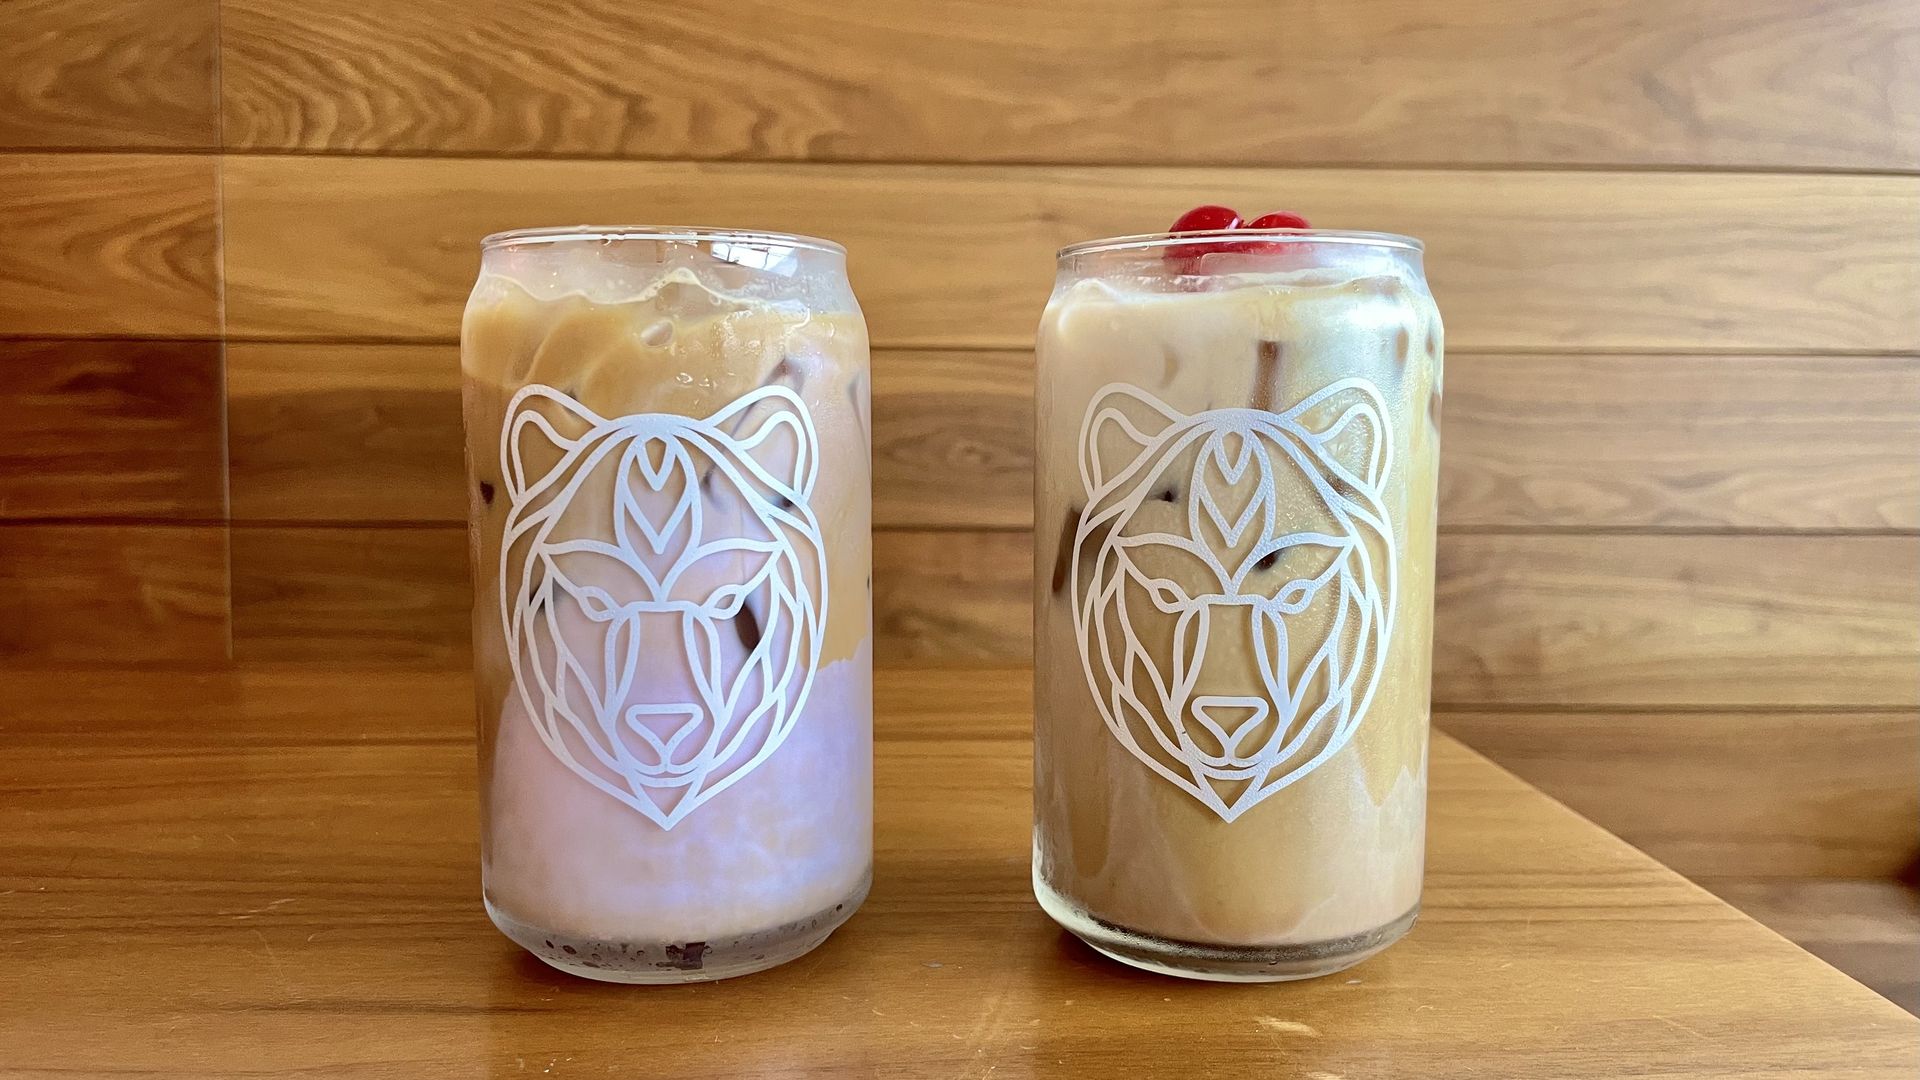 Two iced coffees in glass jars.